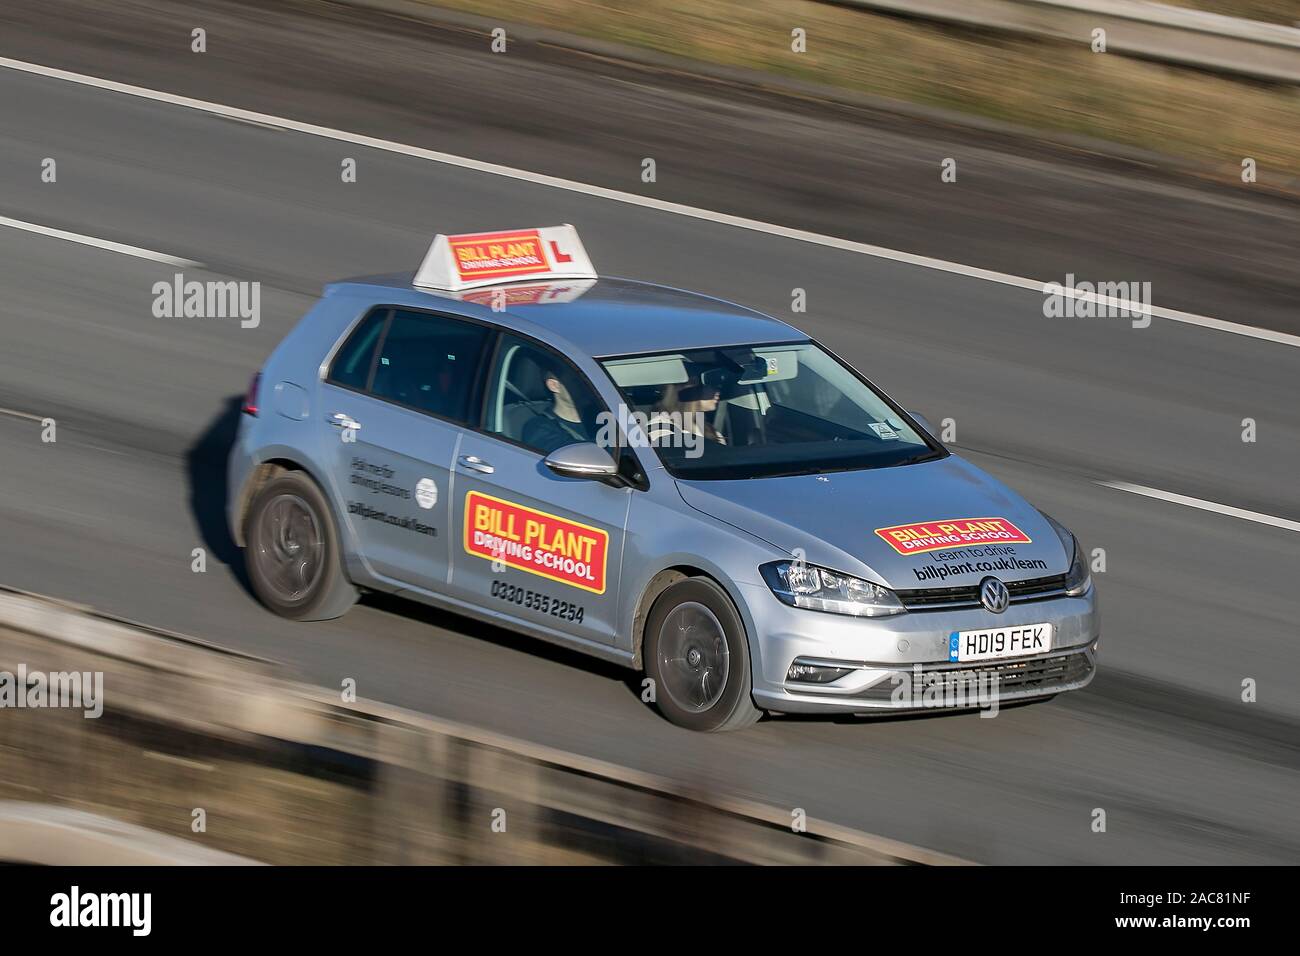 Blurred moving car Bill Plant Driving School  traveling at speed on the M61 motorway Slow camera shutter speed vehicle movement Stock Photo